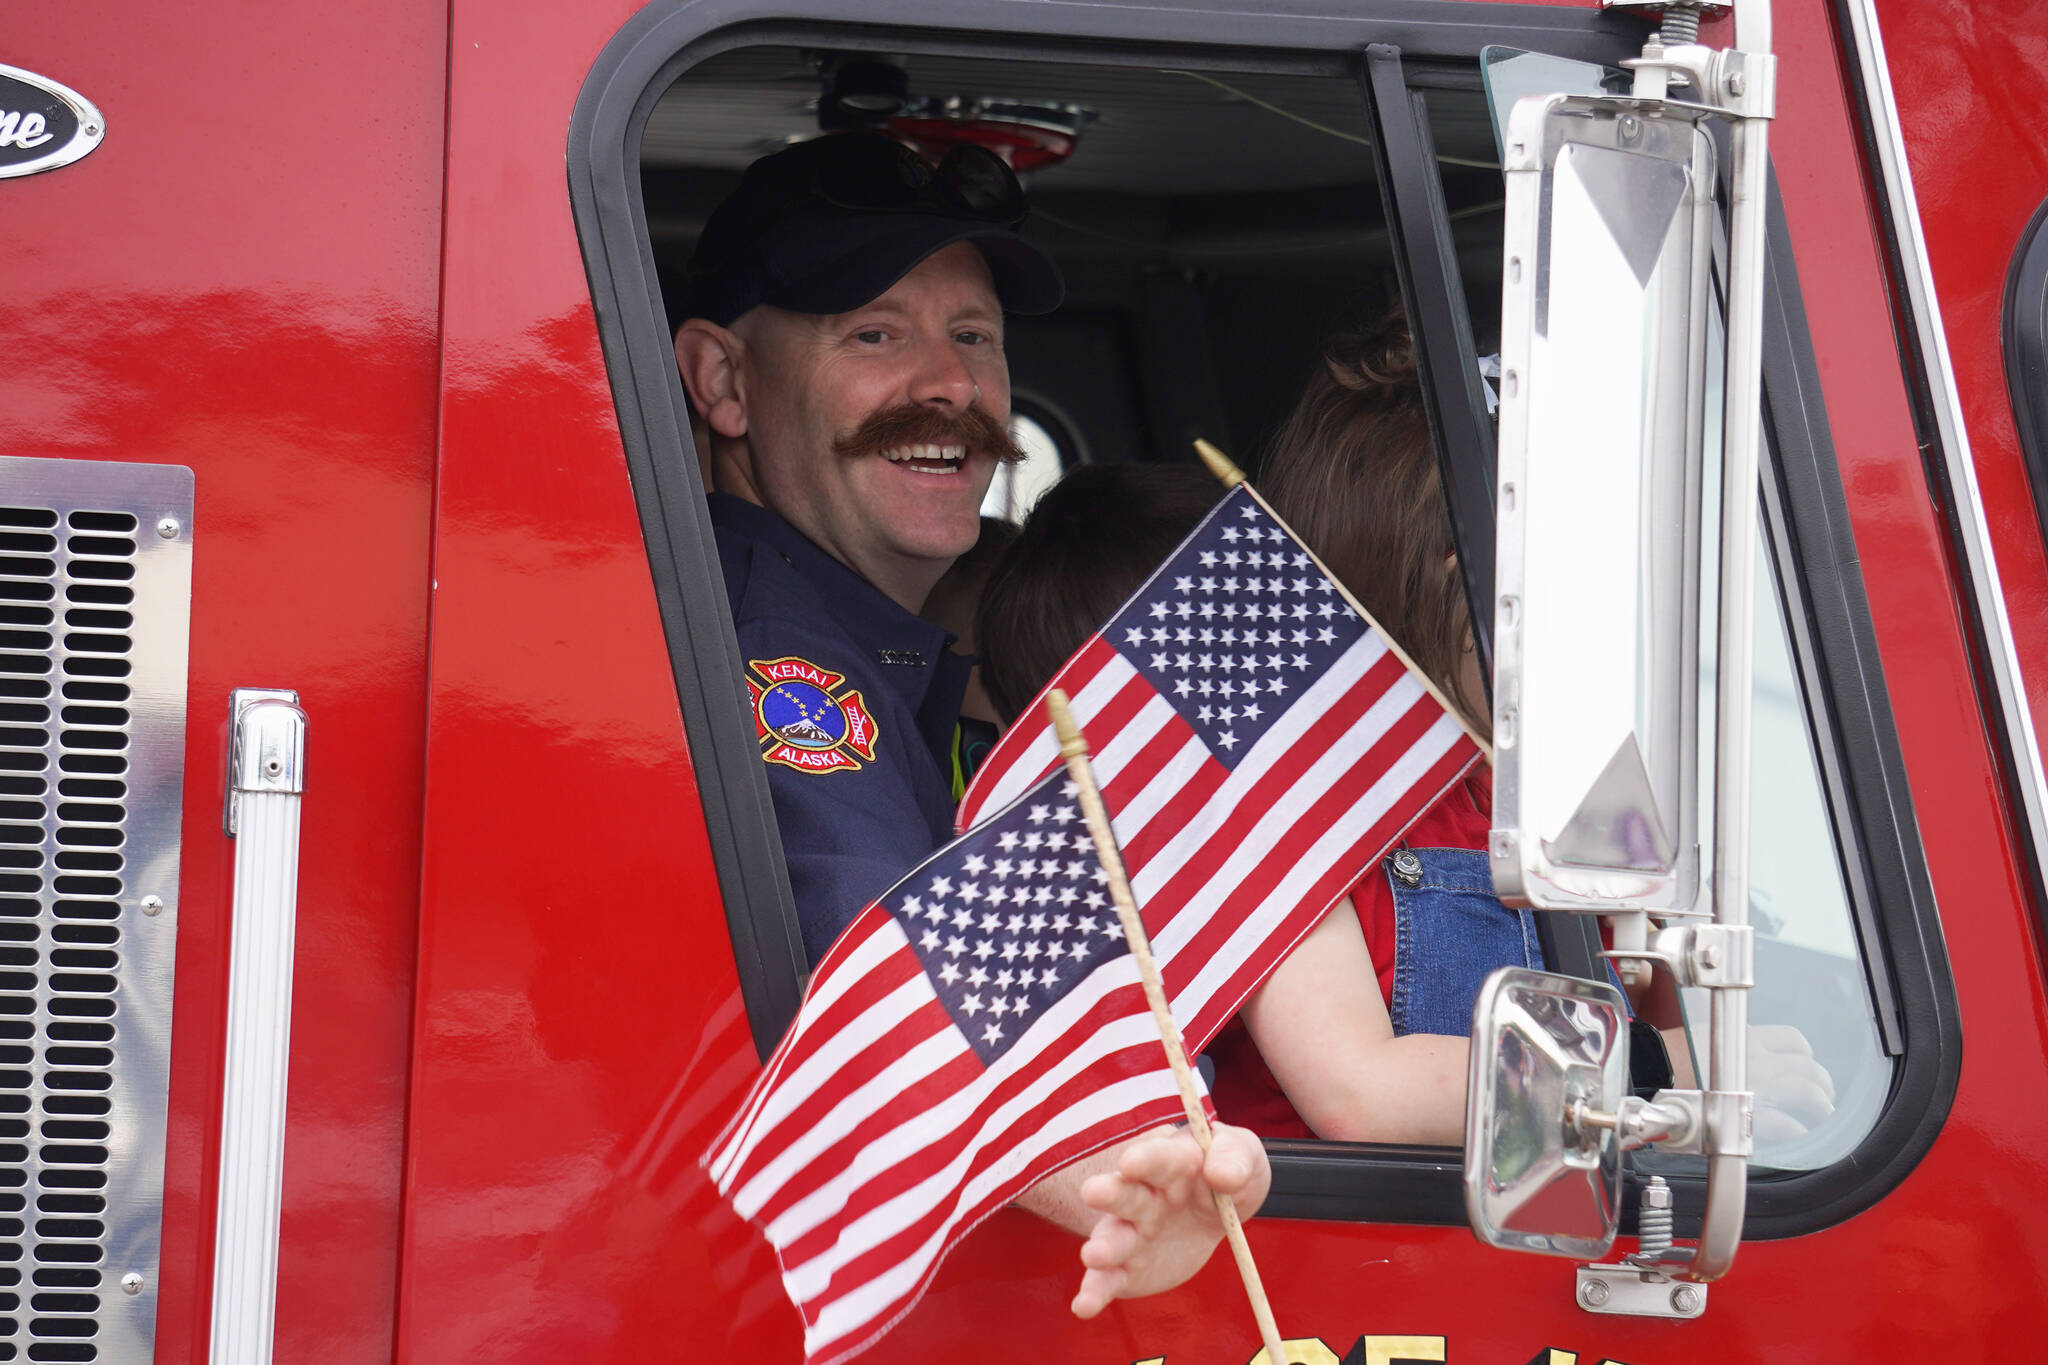 Mitch Miller, of Kenai Fire Department, smiles and waves as the Fourth of July Parade moves down the South Willow Street in Kenai, Alaska on Tuesday, July 4, 2023. (Jake Dye/Peninsula Clarion)